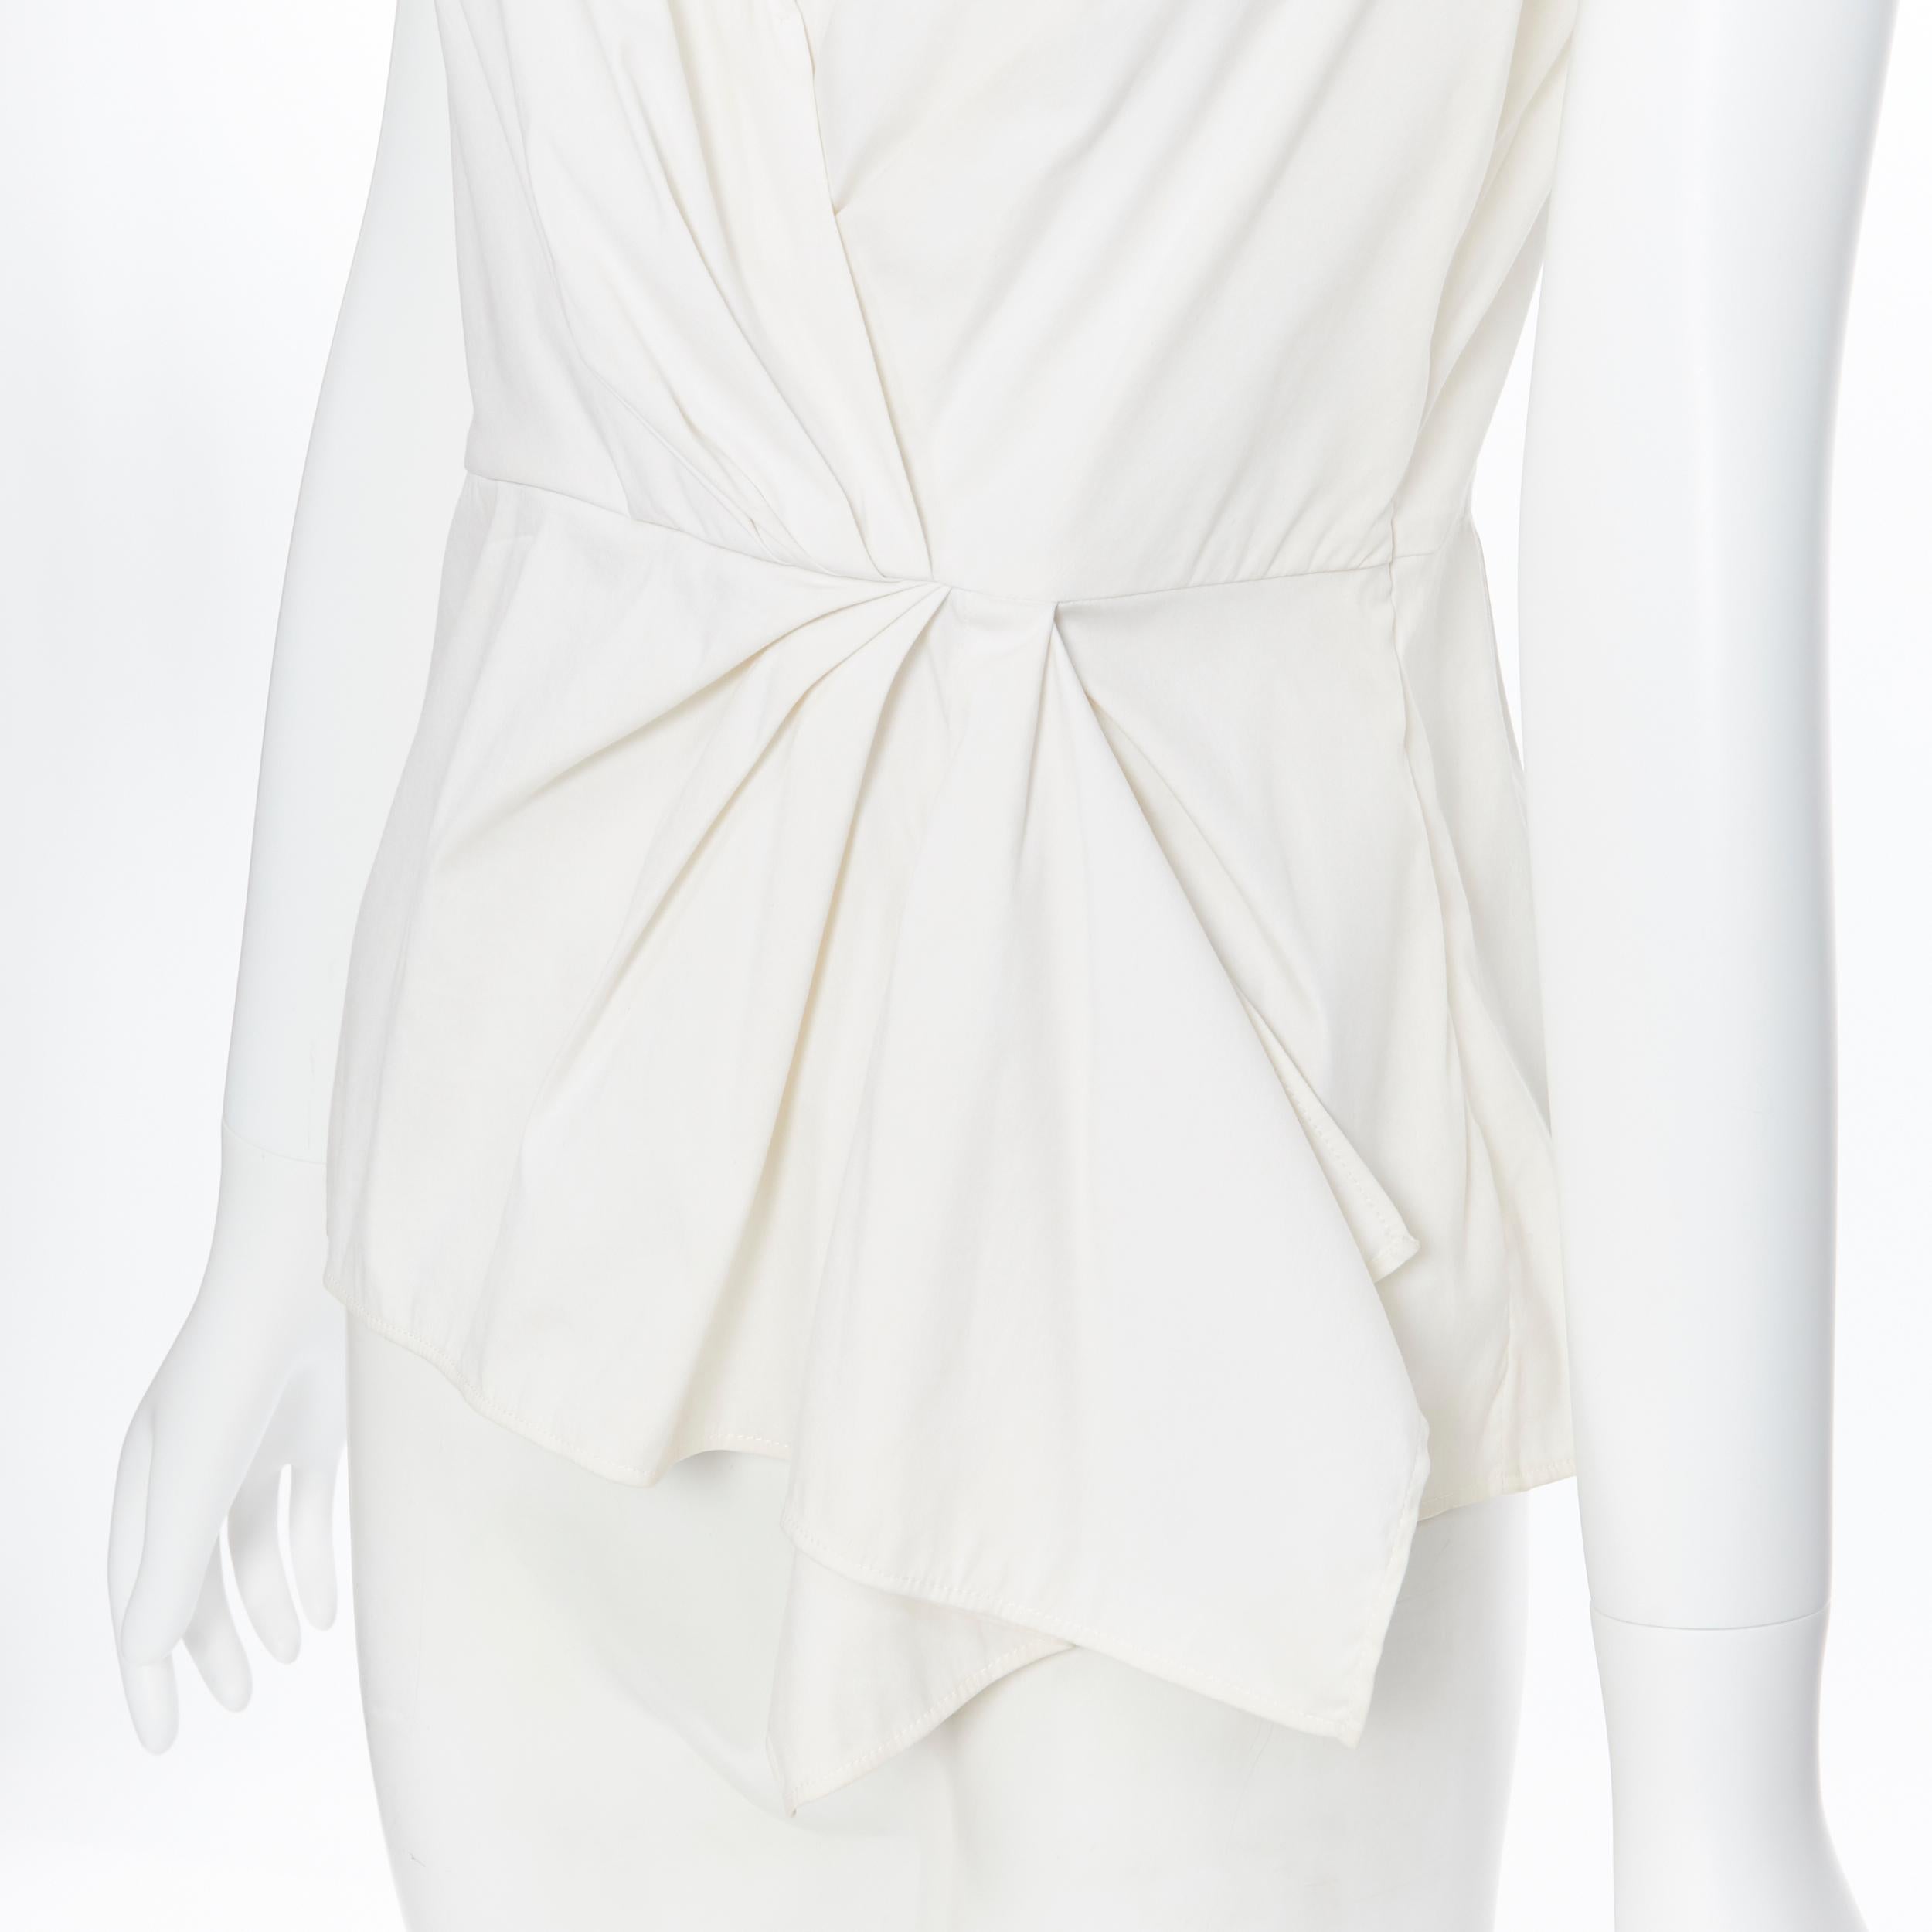 PRADA white stretch cotton draped pleated crossover sleeveless top IT42
Brand: Prada
Designer: Miuccia Prada
Model Name / Style: Draped top
Material: Cotton blend
Color: White
Pattern: Solid
Closure: Zip
Extra Detail: Draped pleated detailing.